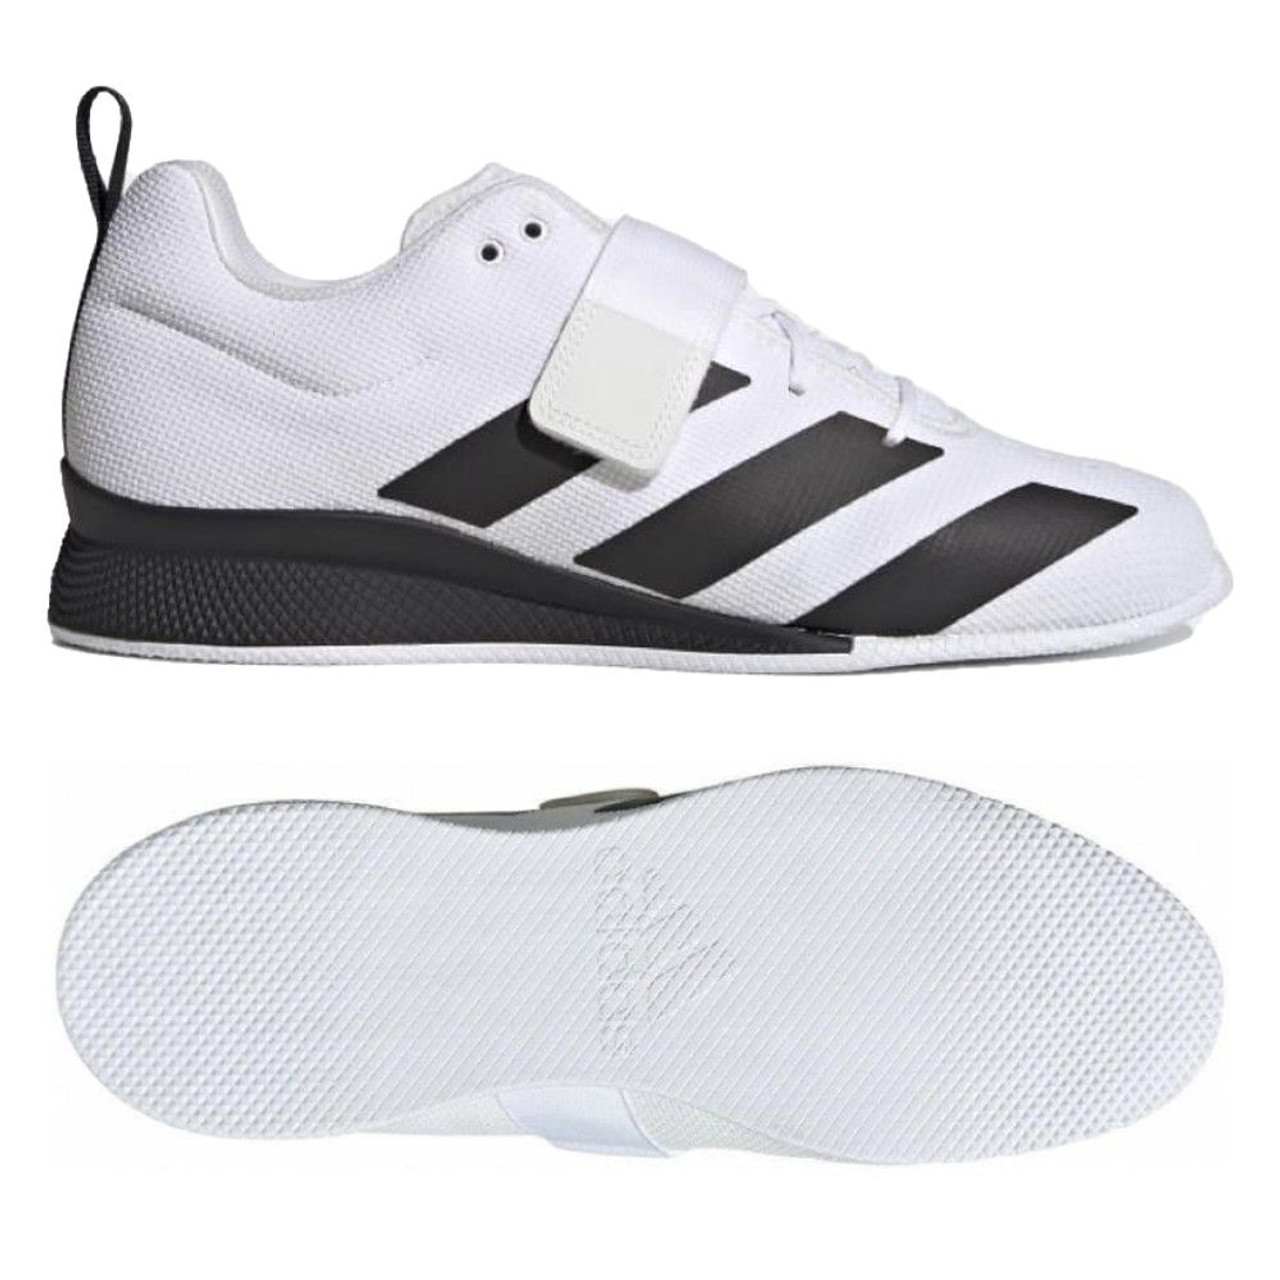 ADIDAS ADIPOWER 3 WEIGHTLIFTING SHOES Cloud White / Core Black / Grey Two  (GY8926)